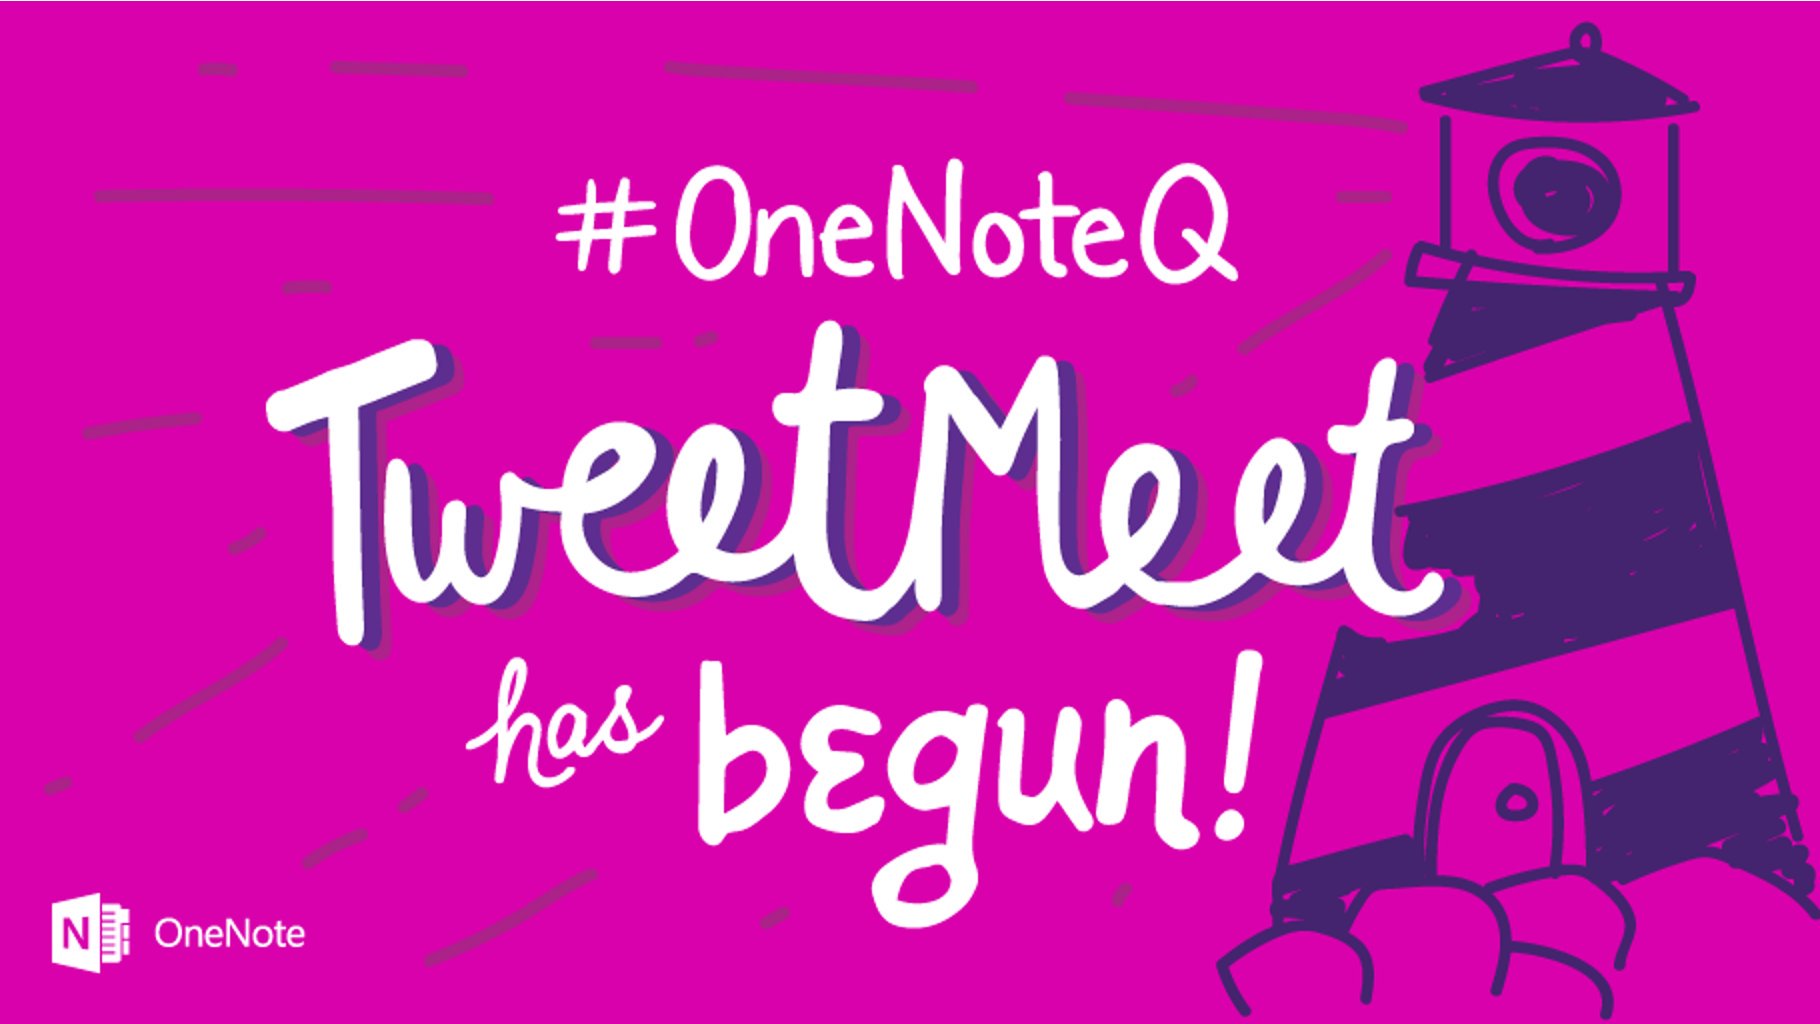 There you are, welcome! 
#OneNote passion is global. Please teach us some greetings in your own language!

#OneNoteQ https://t.co/IfdlAcny0b